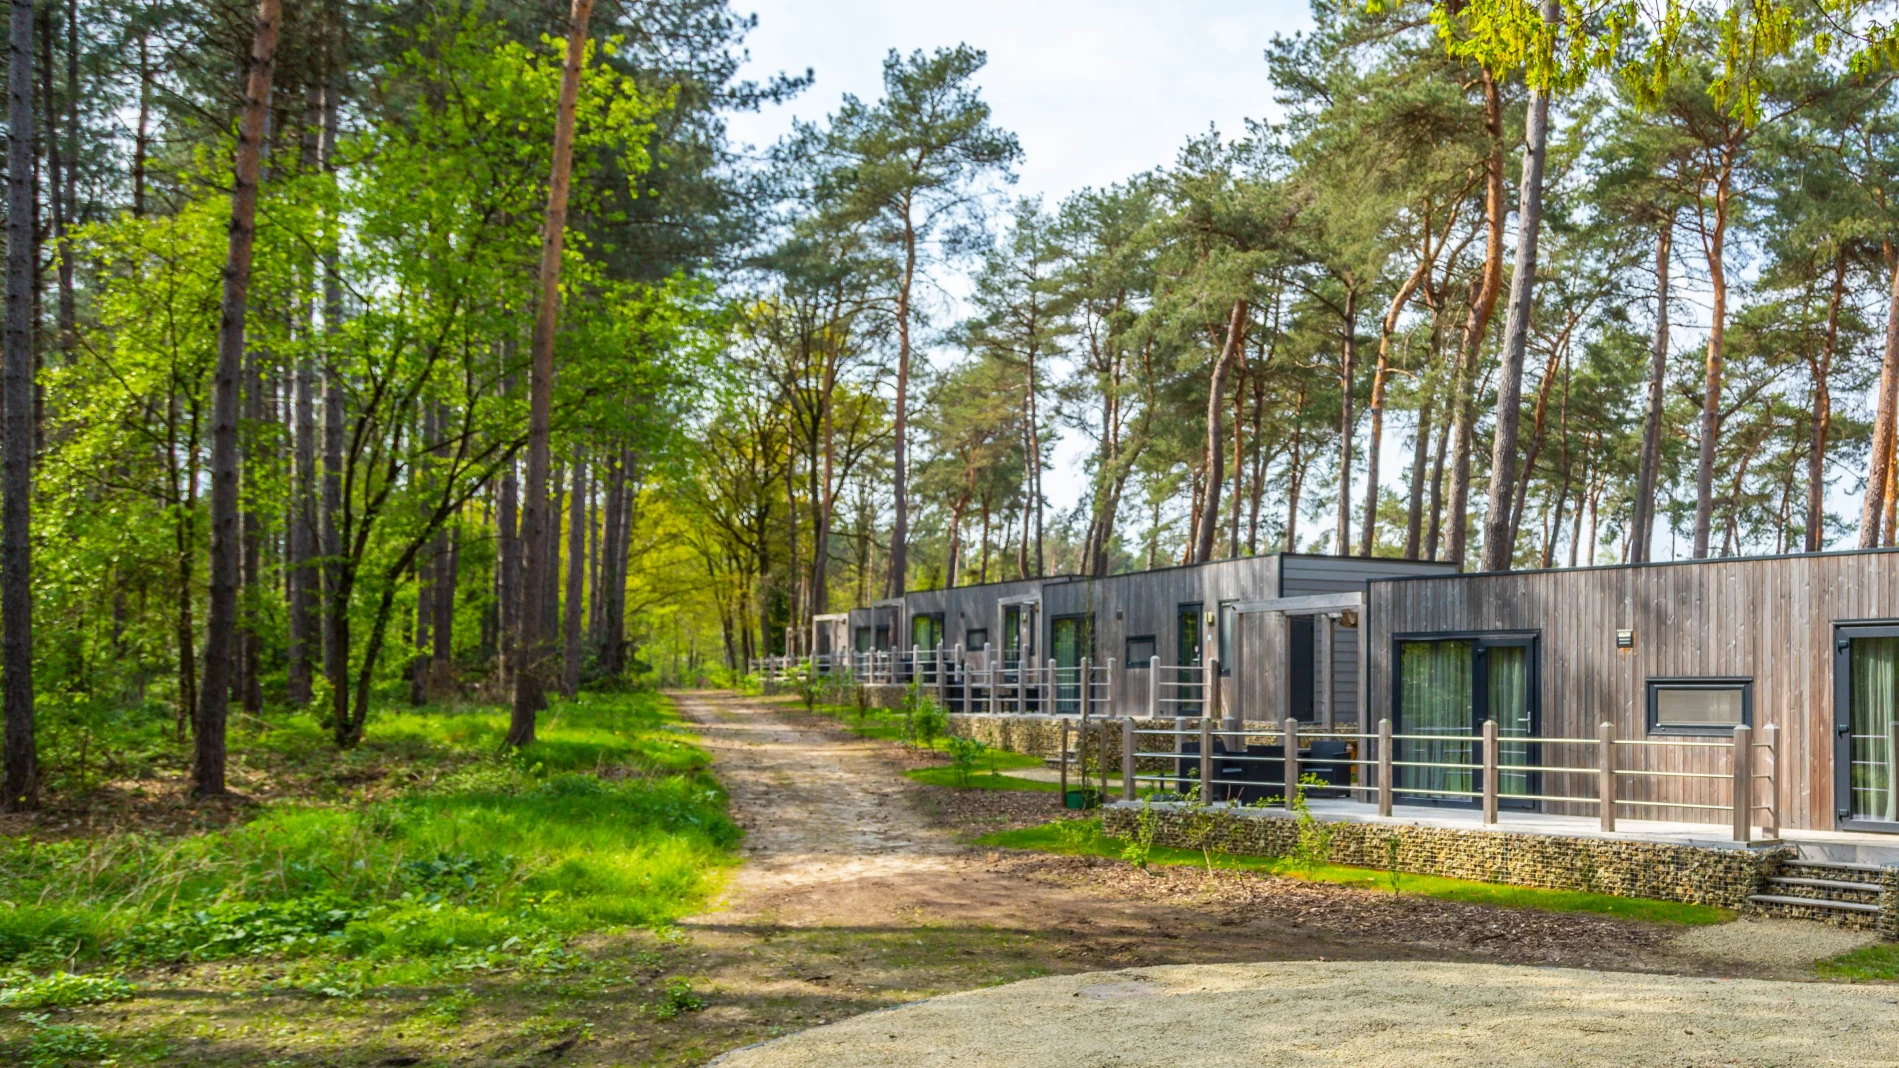 EuroParcs Hoge Kempen holiday homes in nature